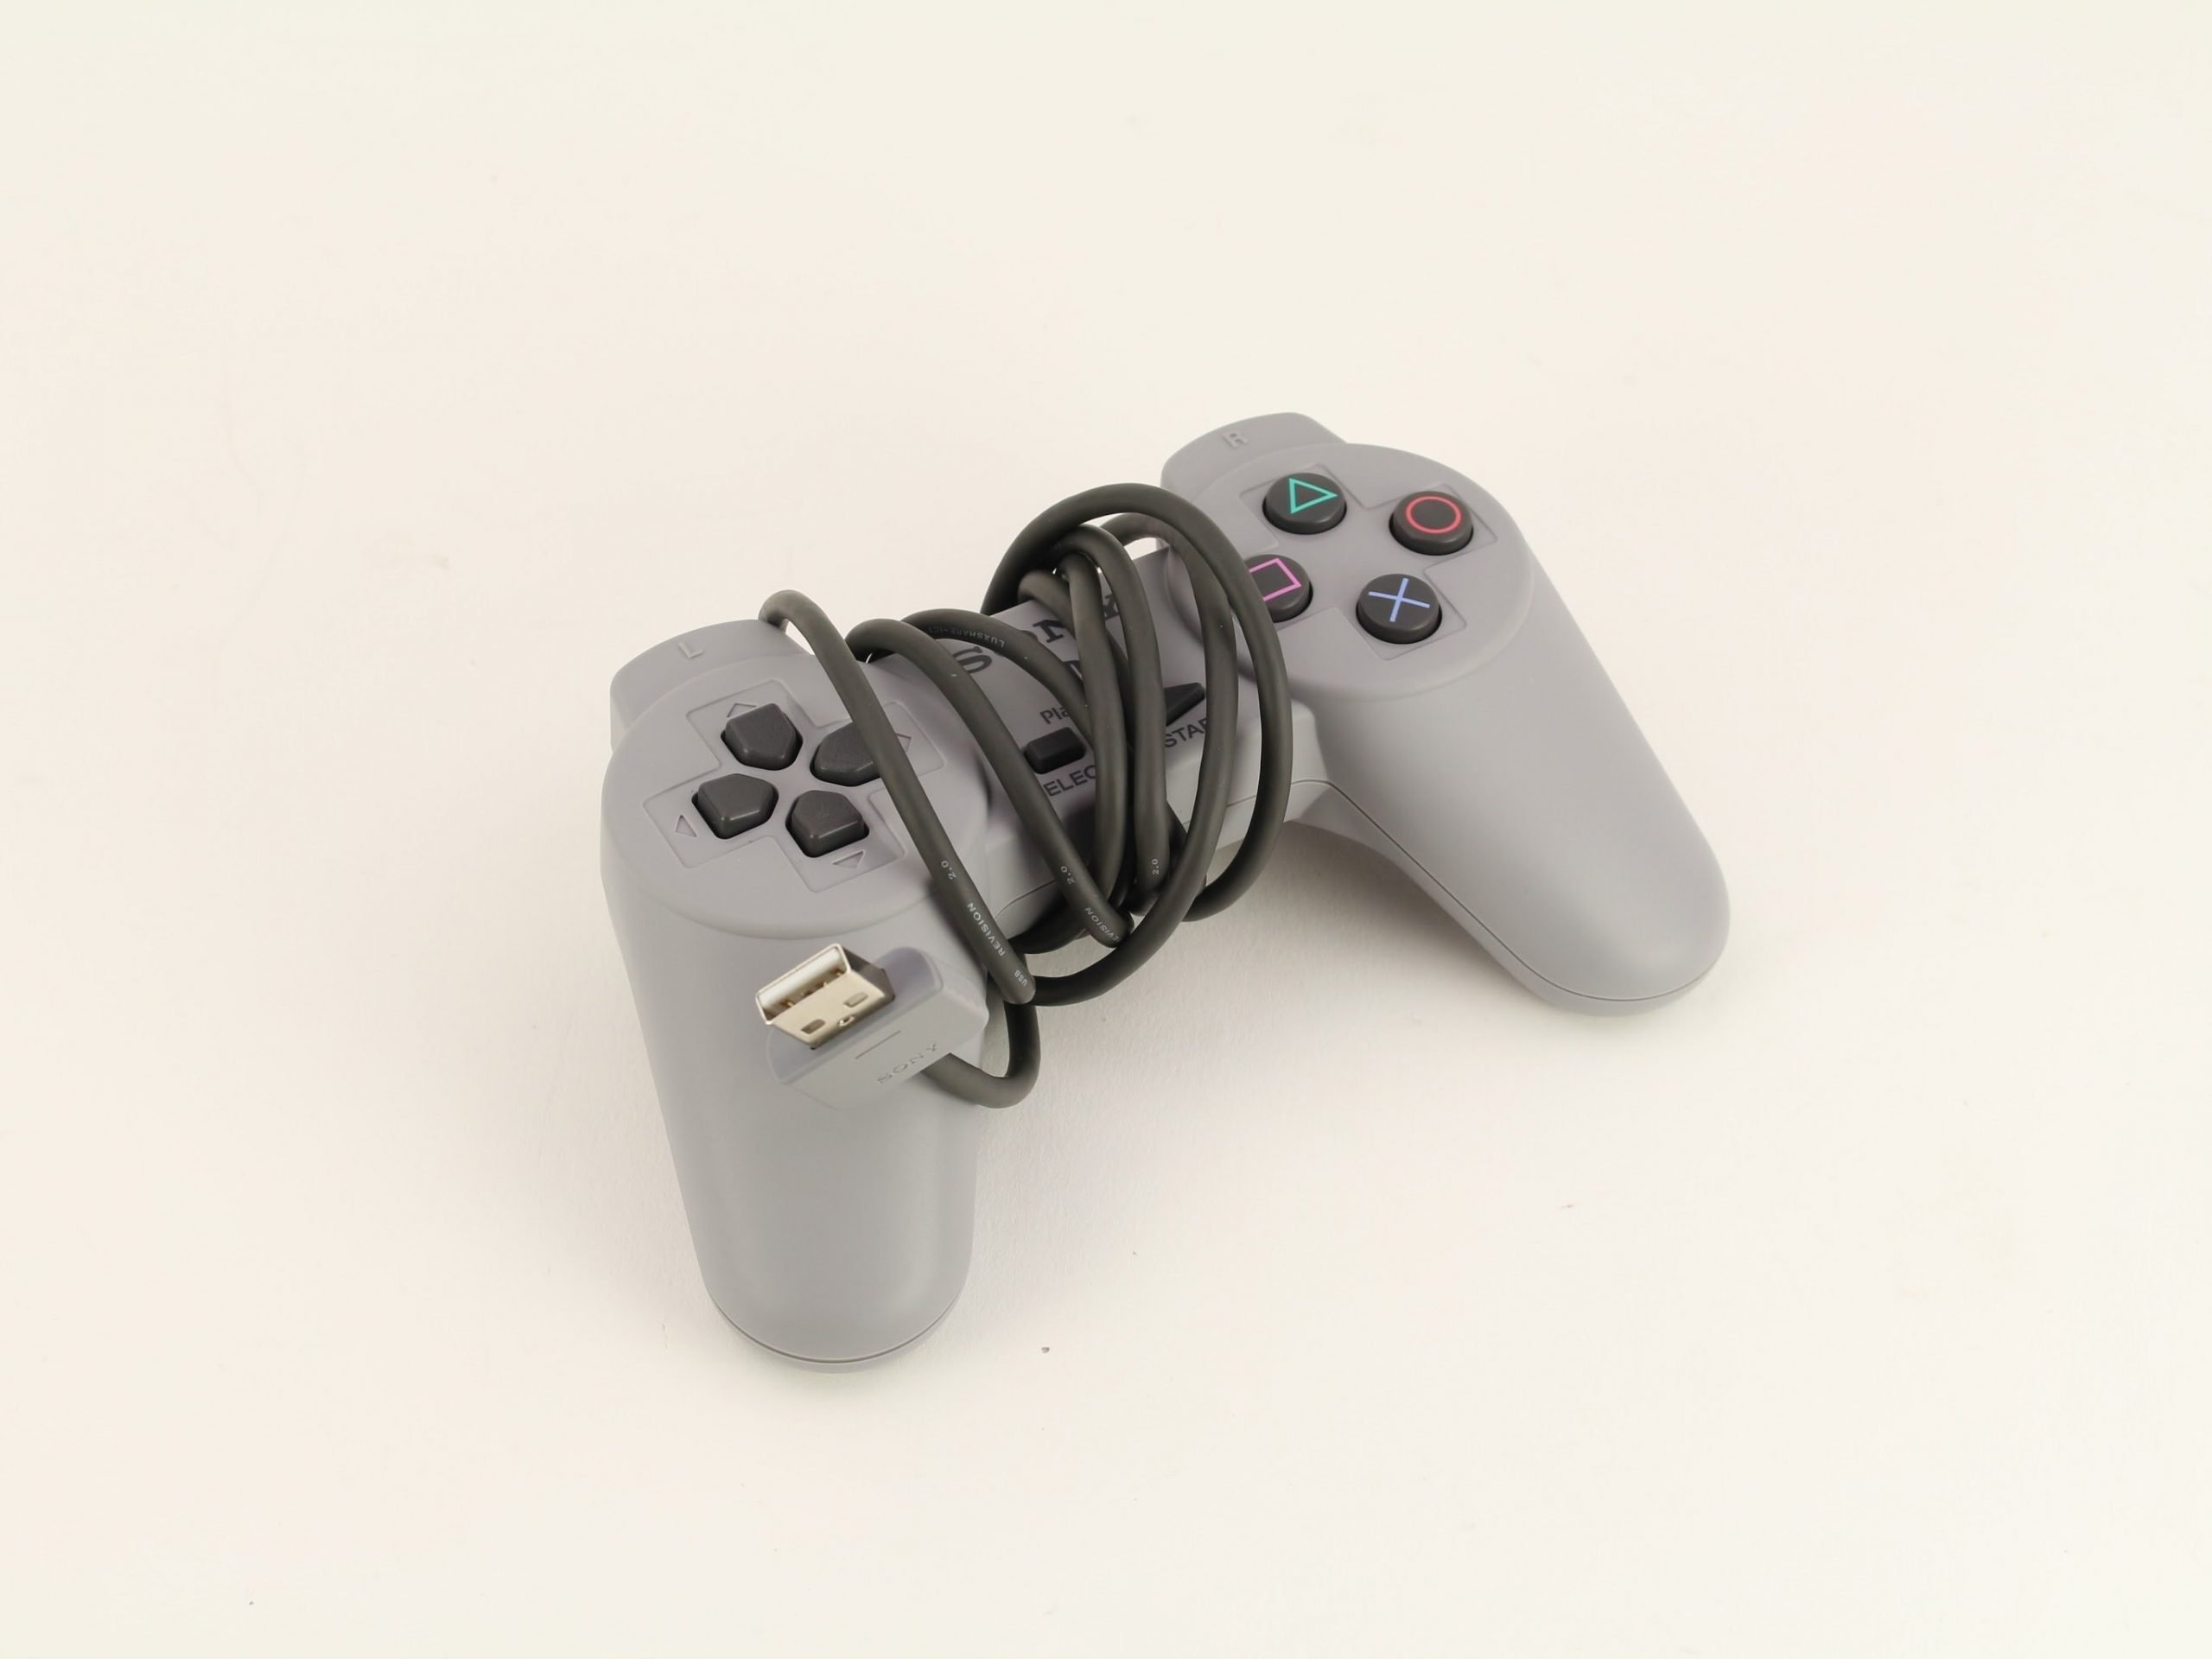 Playstation Classic Controller Cord Replacement